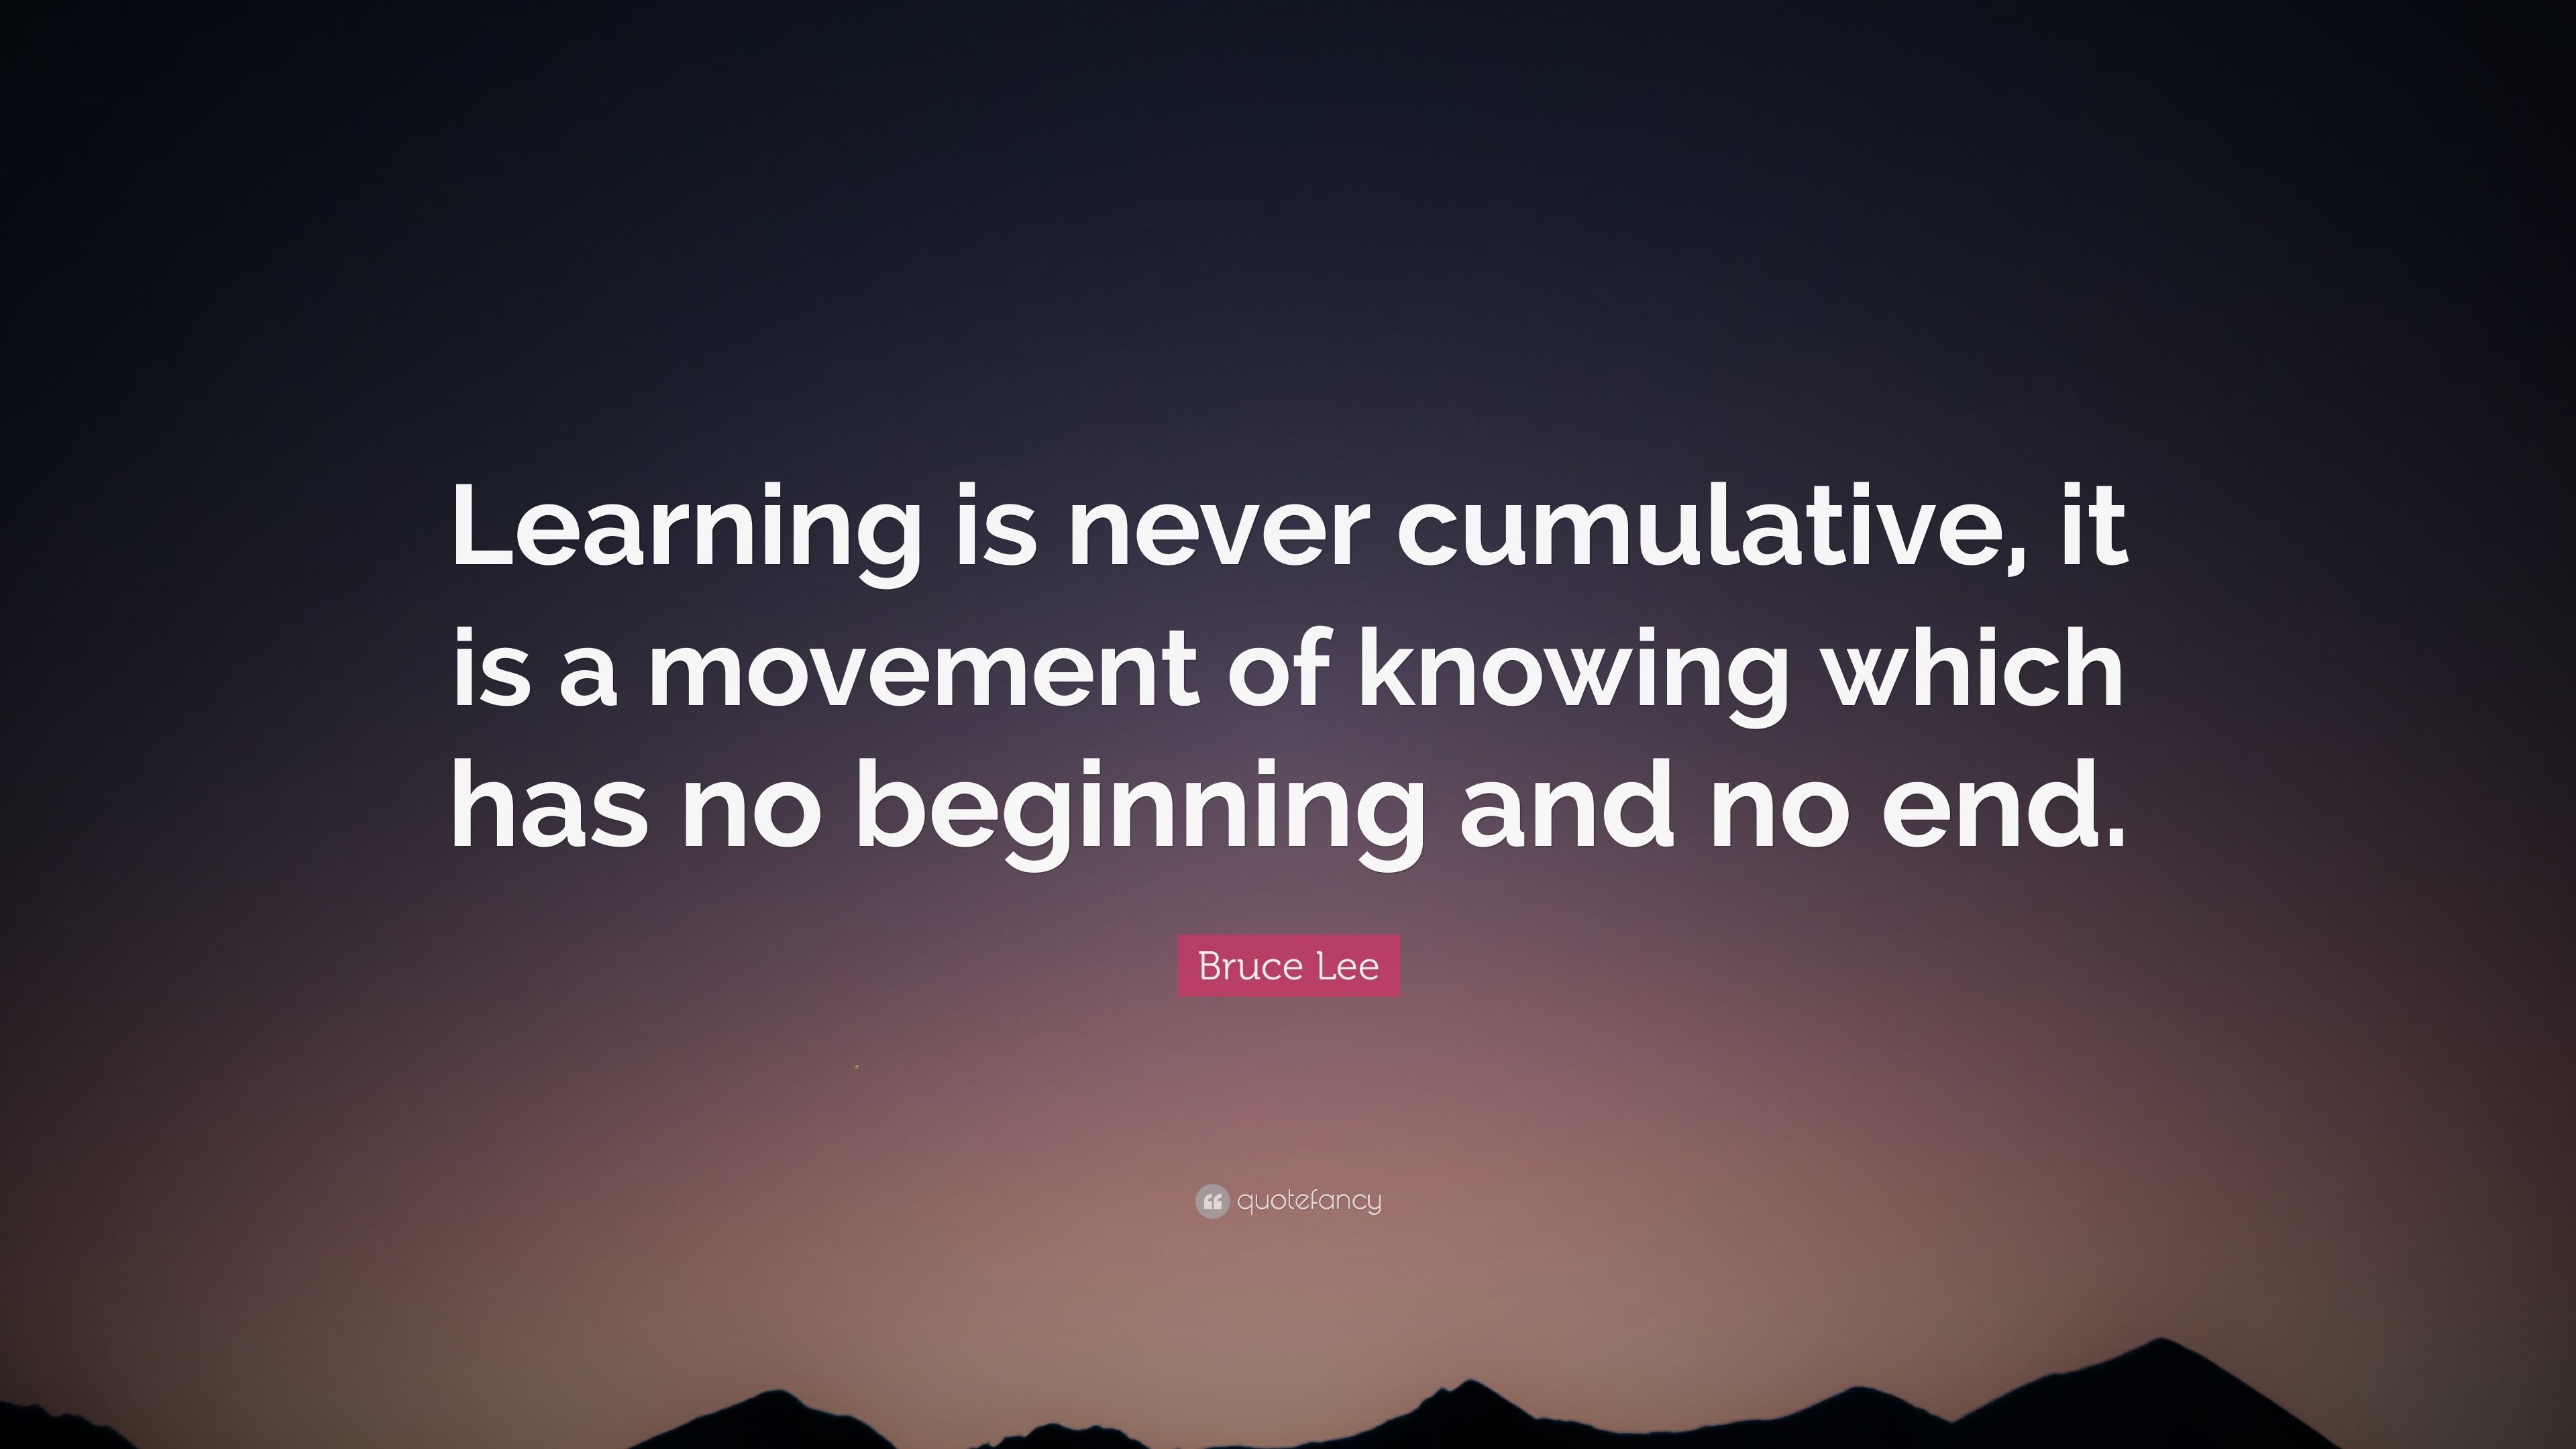 Ongebruikt Bruce Lee Quote: “Learning is never cumulative, it is a movement HU-51